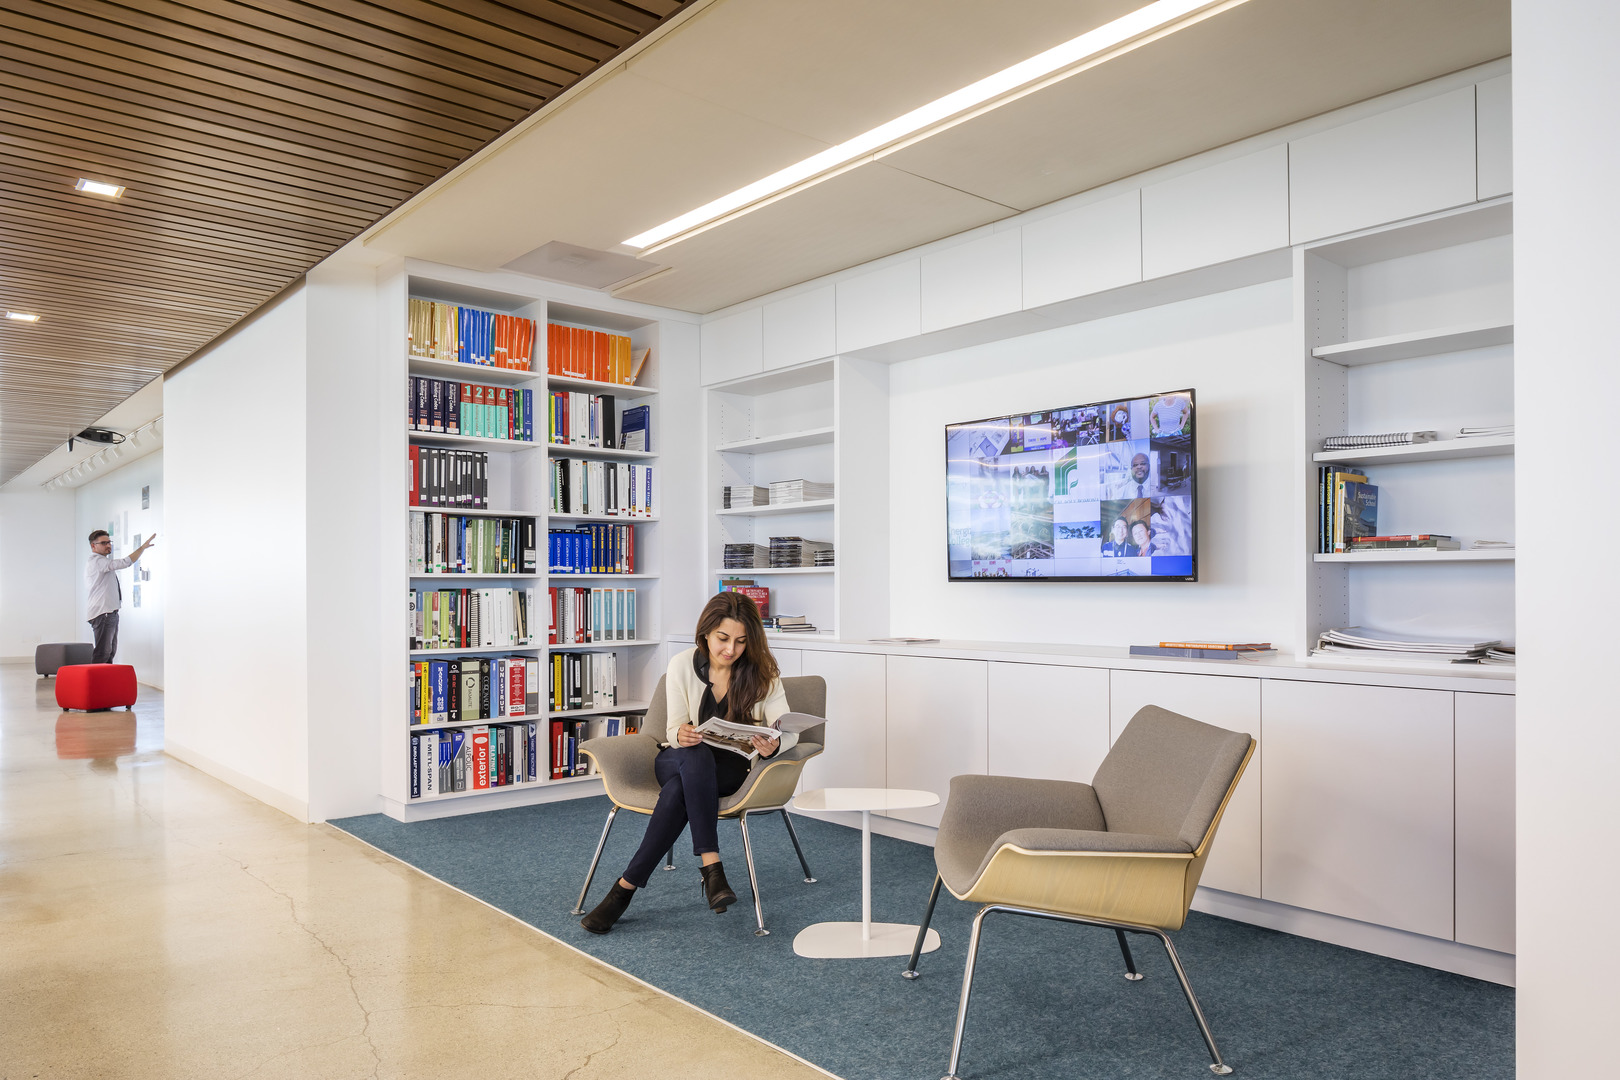 Designers use various office architecture concepts to create a positive ripple effect